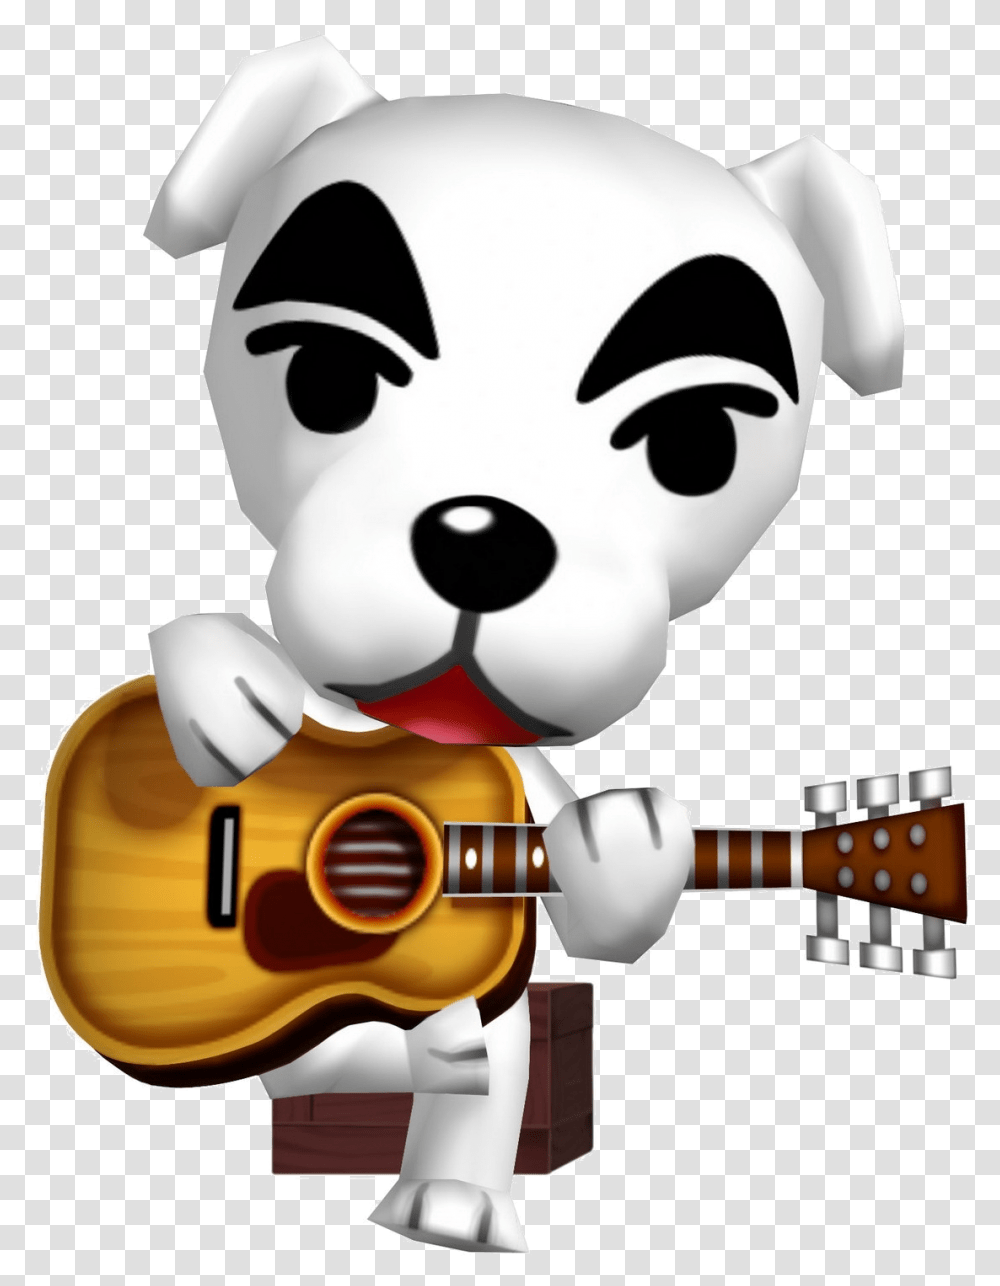 Animal Crossing 7 Image Dog From Animal Crossing, Toy, Guitar, Leisure Activities, Musical Instrument Transparent Png